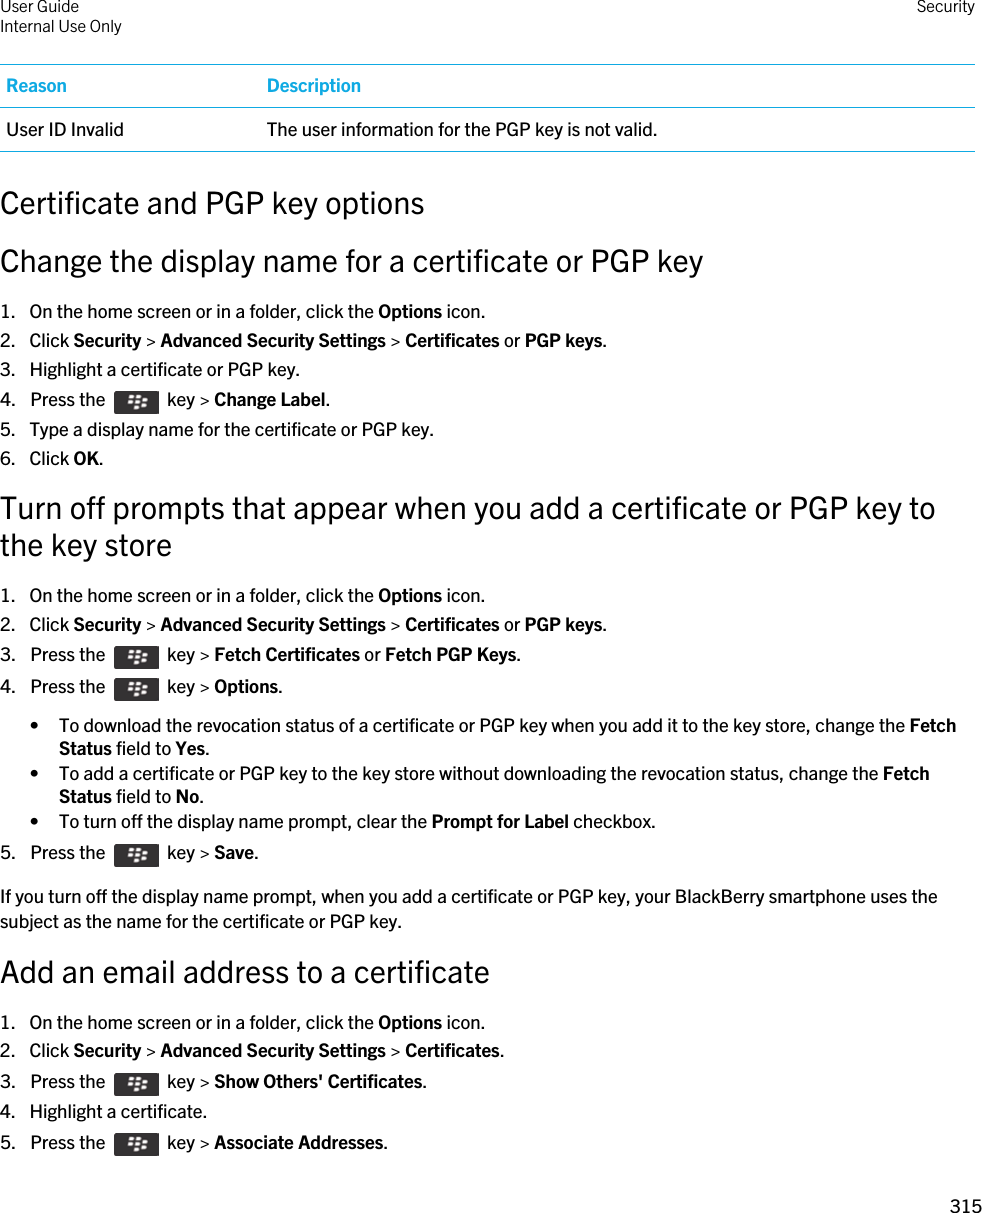 Reason DescriptionUser ID Invalid The user information for the PGP key is not valid.Certificate and PGP key optionsChange the display name for a certificate or PGP key1. On the home screen or in a folder, click the Options icon.2. Click Security &gt; Advanced Security Settings &gt; Certificates or PGP keys.3. Highlight a certificate or PGP key.4.  Press the    key &gt; Change Label. 5. Type a display name for the certificate or PGP key.6. Click OK.Turn off prompts that appear when you add a certificate or PGP key to the key store1. On the home screen or in a folder, click the Options icon.2. Click Security &gt; Advanced Security Settings &gt; Certificates or PGP keys.3.  Press the    key &gt; Fetch Certificates or Fetch PGP Keys. 4.  Press the    key &gt; Options. • To download the revocation status of a certificate or PGP key when you add it to the key store, change the Fetch Status field to Yes.• To add a certificate or PGP key to the key store without downloading the revocation status, change the Fetch Status field to No.• To turn off the display name prompt, clear the Prompt for Label checkbox.5.  Press the    key &gt; Save. If you turn off the display name prompt, when you add a certificate or PGP key, your BlackBerry smartphone uses the subject as the name for the certificate or PGP key.Add an email address to a certificate1. On the home screen or in a folder, click the Options icon.2. Click Security &gt; Advanced Security Settings &gt; Certificates.3.  Press the    key &gt; Show Others&apos; Certificates.4. Highlight a certificate.5.  Press the    key &gt; Associate Addresses. User GuideInternal Use Only Security315 